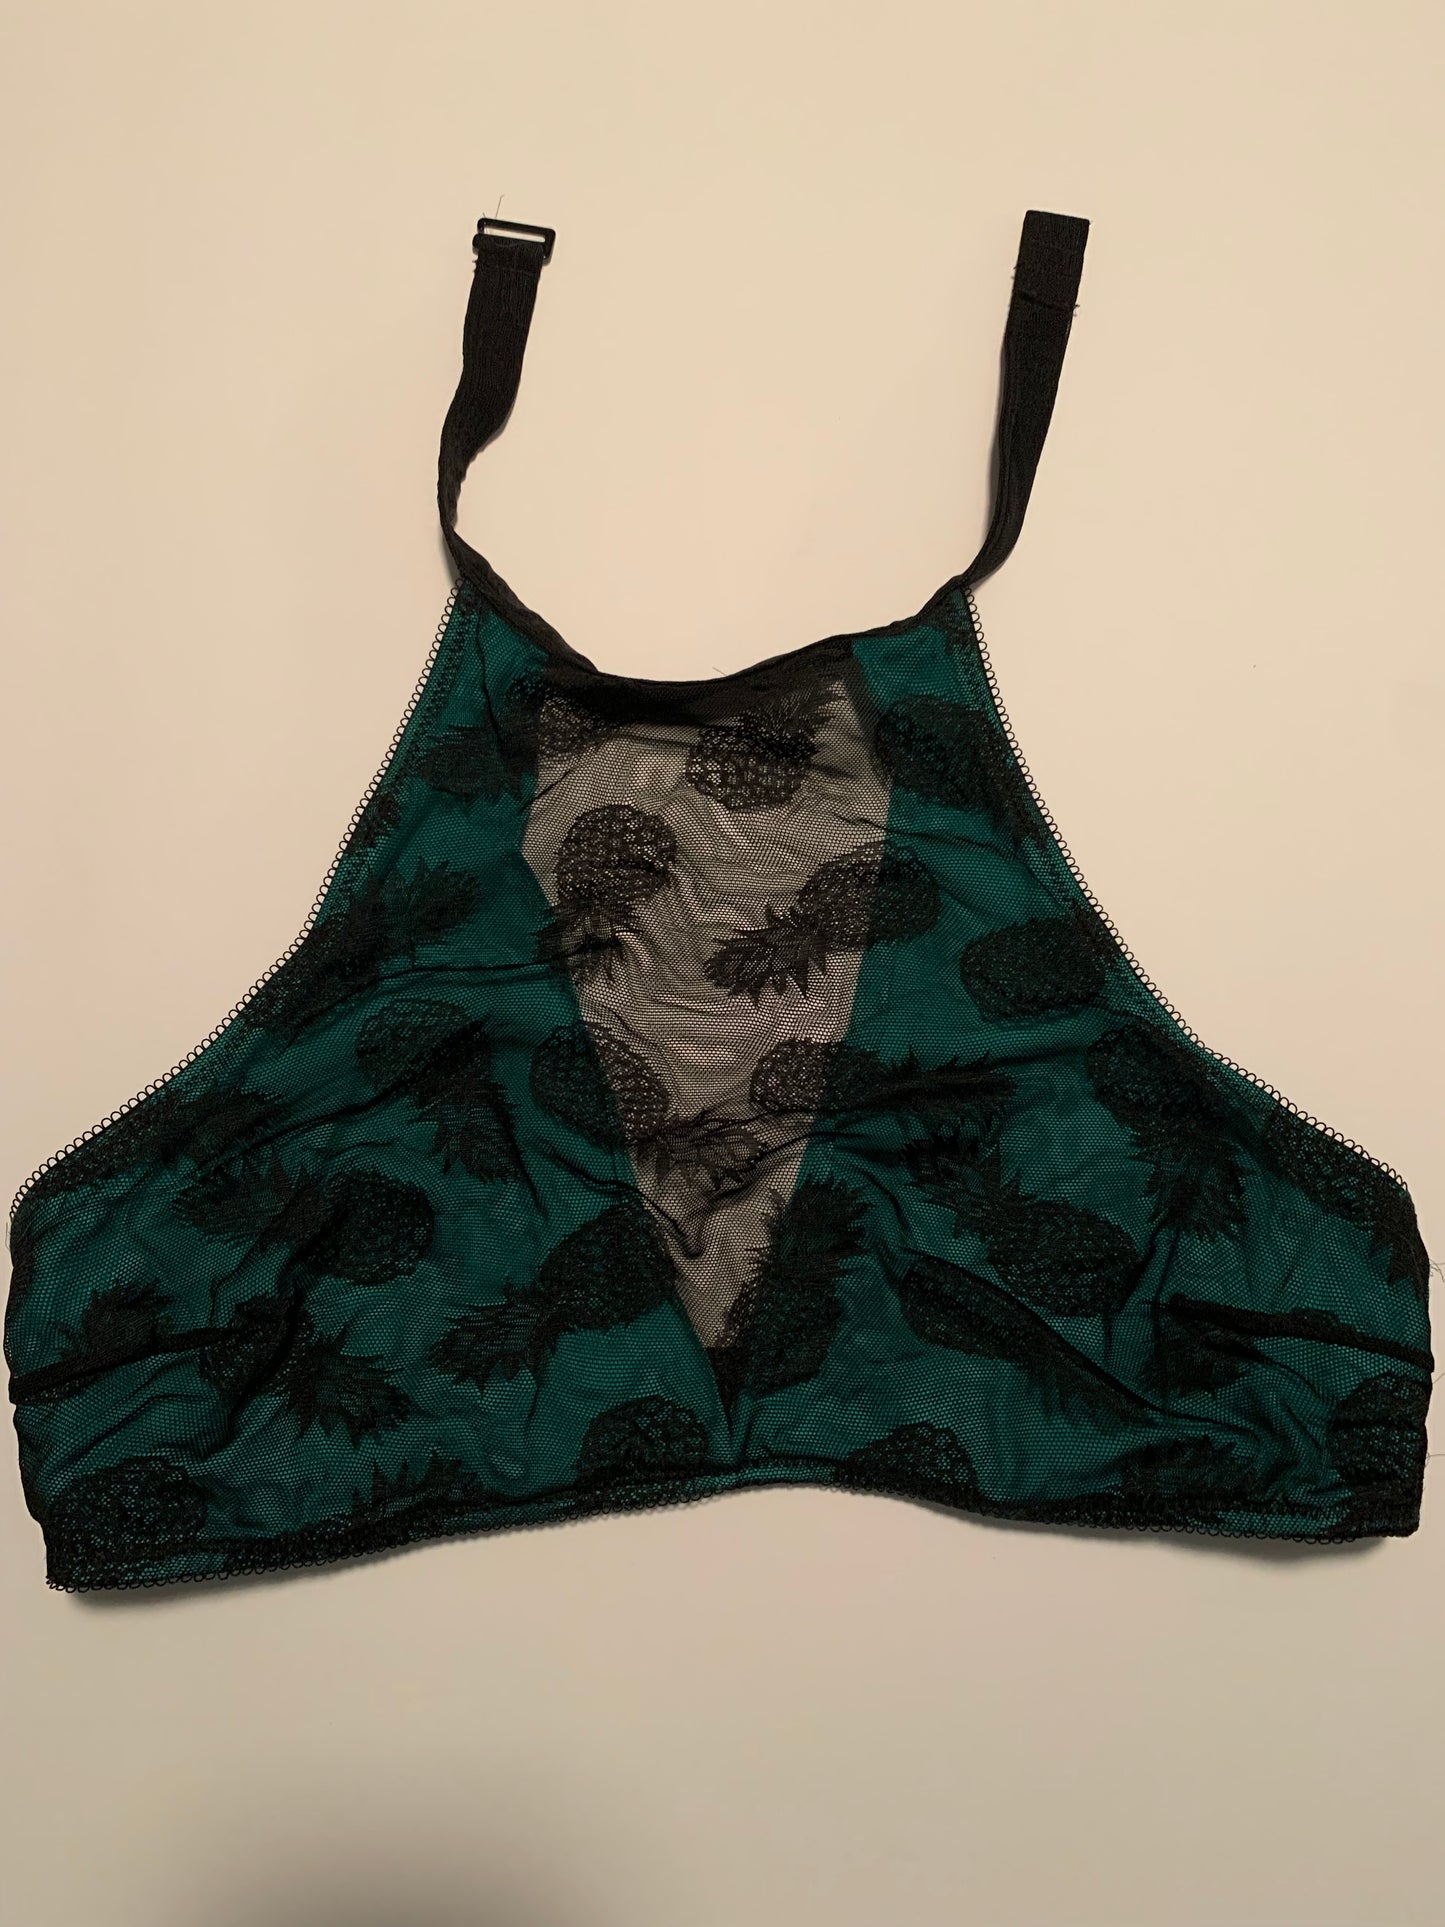 Womens bralette size XL Flirtitude brand black n teal turquoise with pineapples